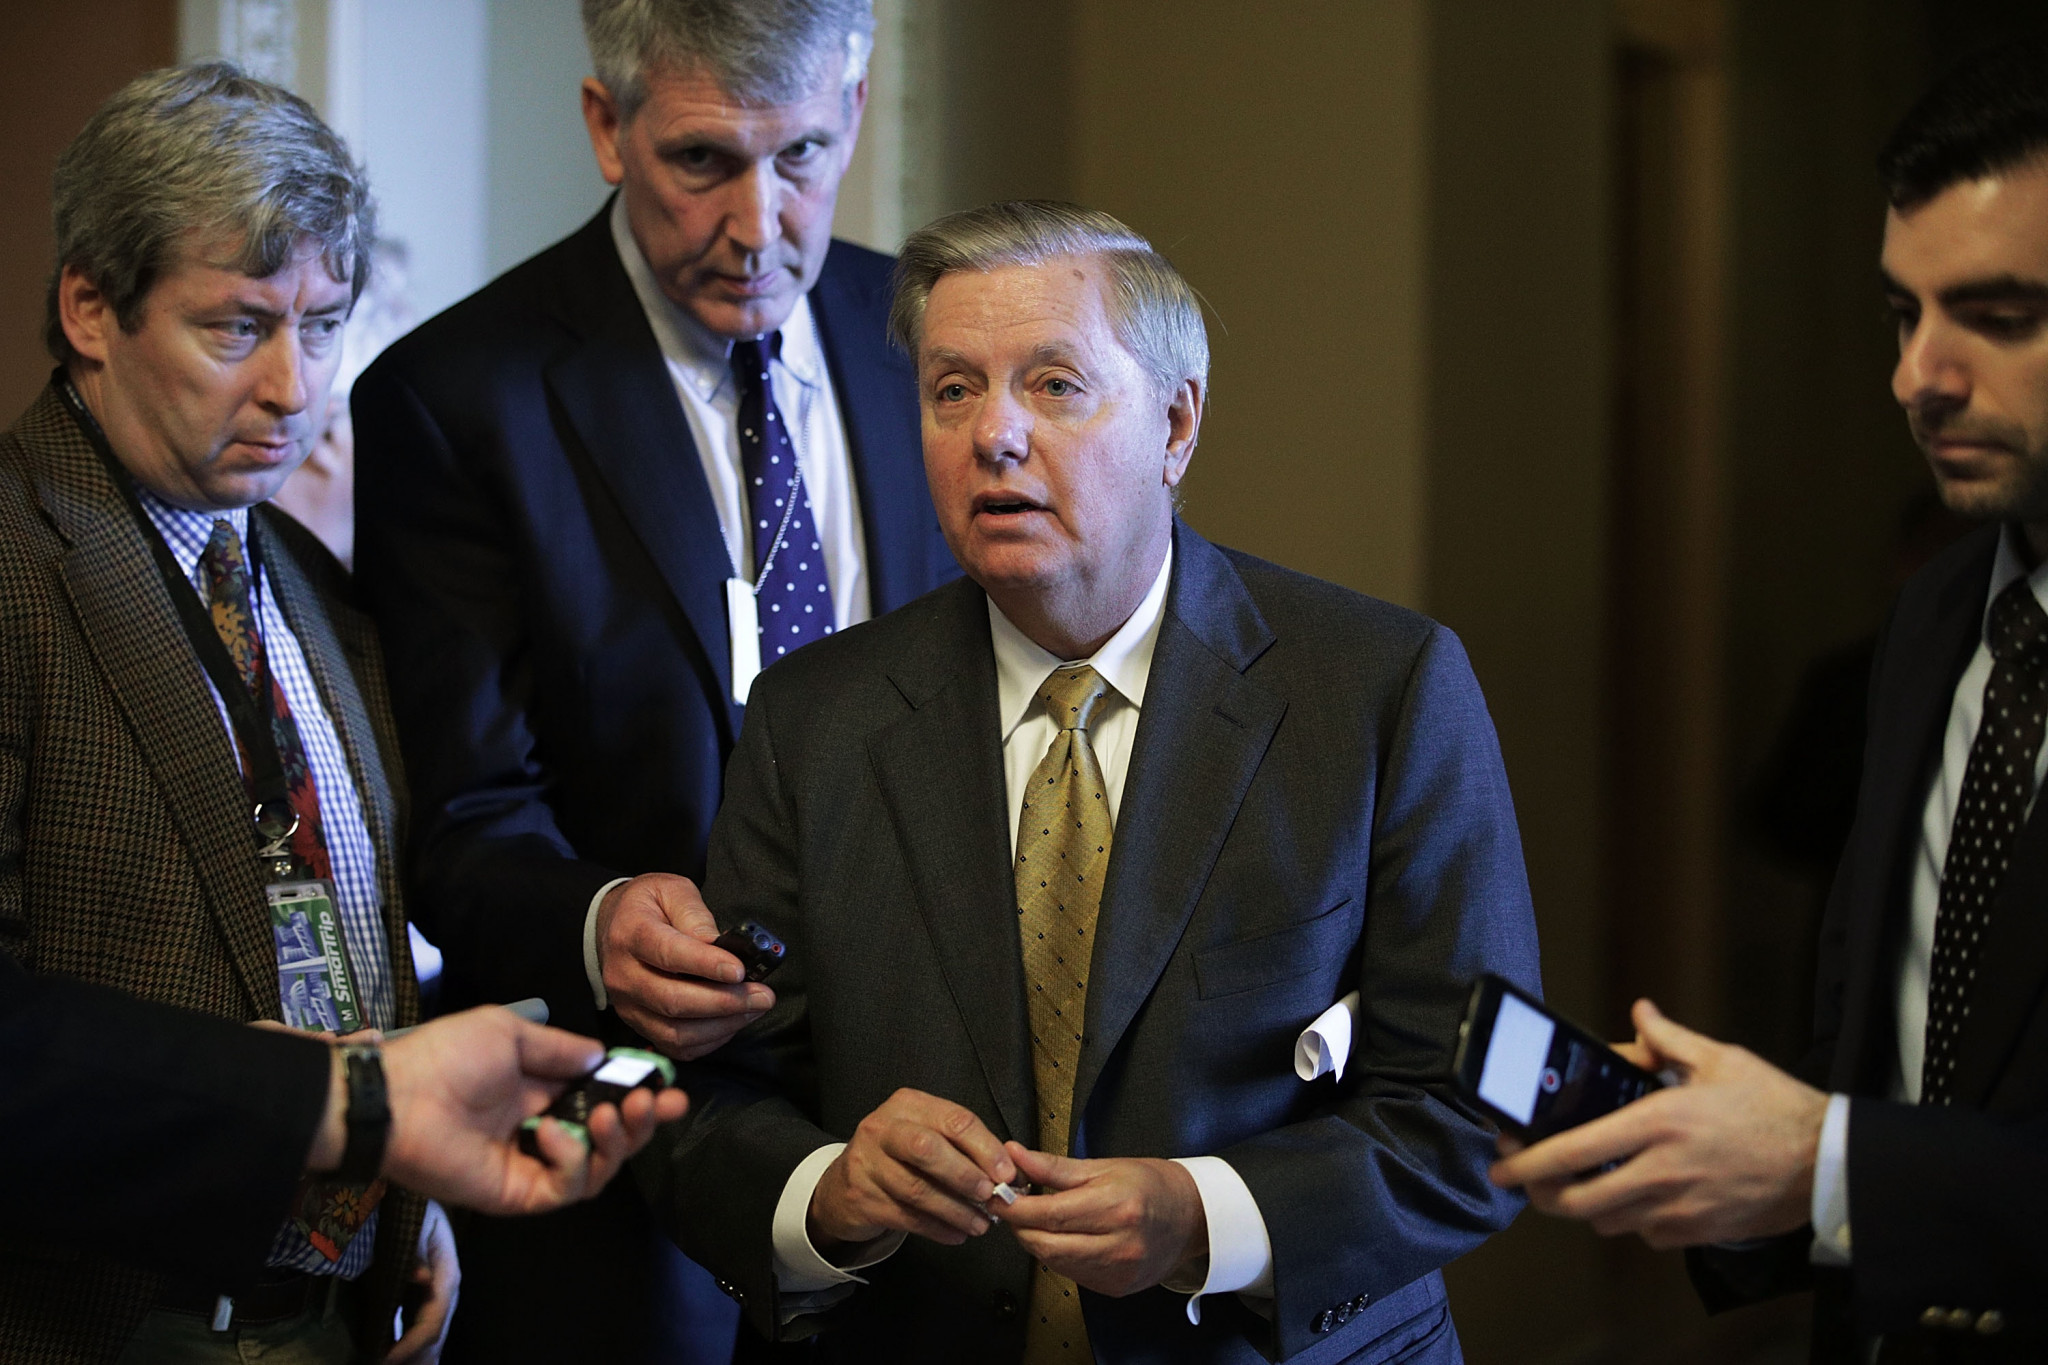 Lindsey Graham suggested the US should pull out of Pyeongchang 2018 should North Korea compete ©Getty Images